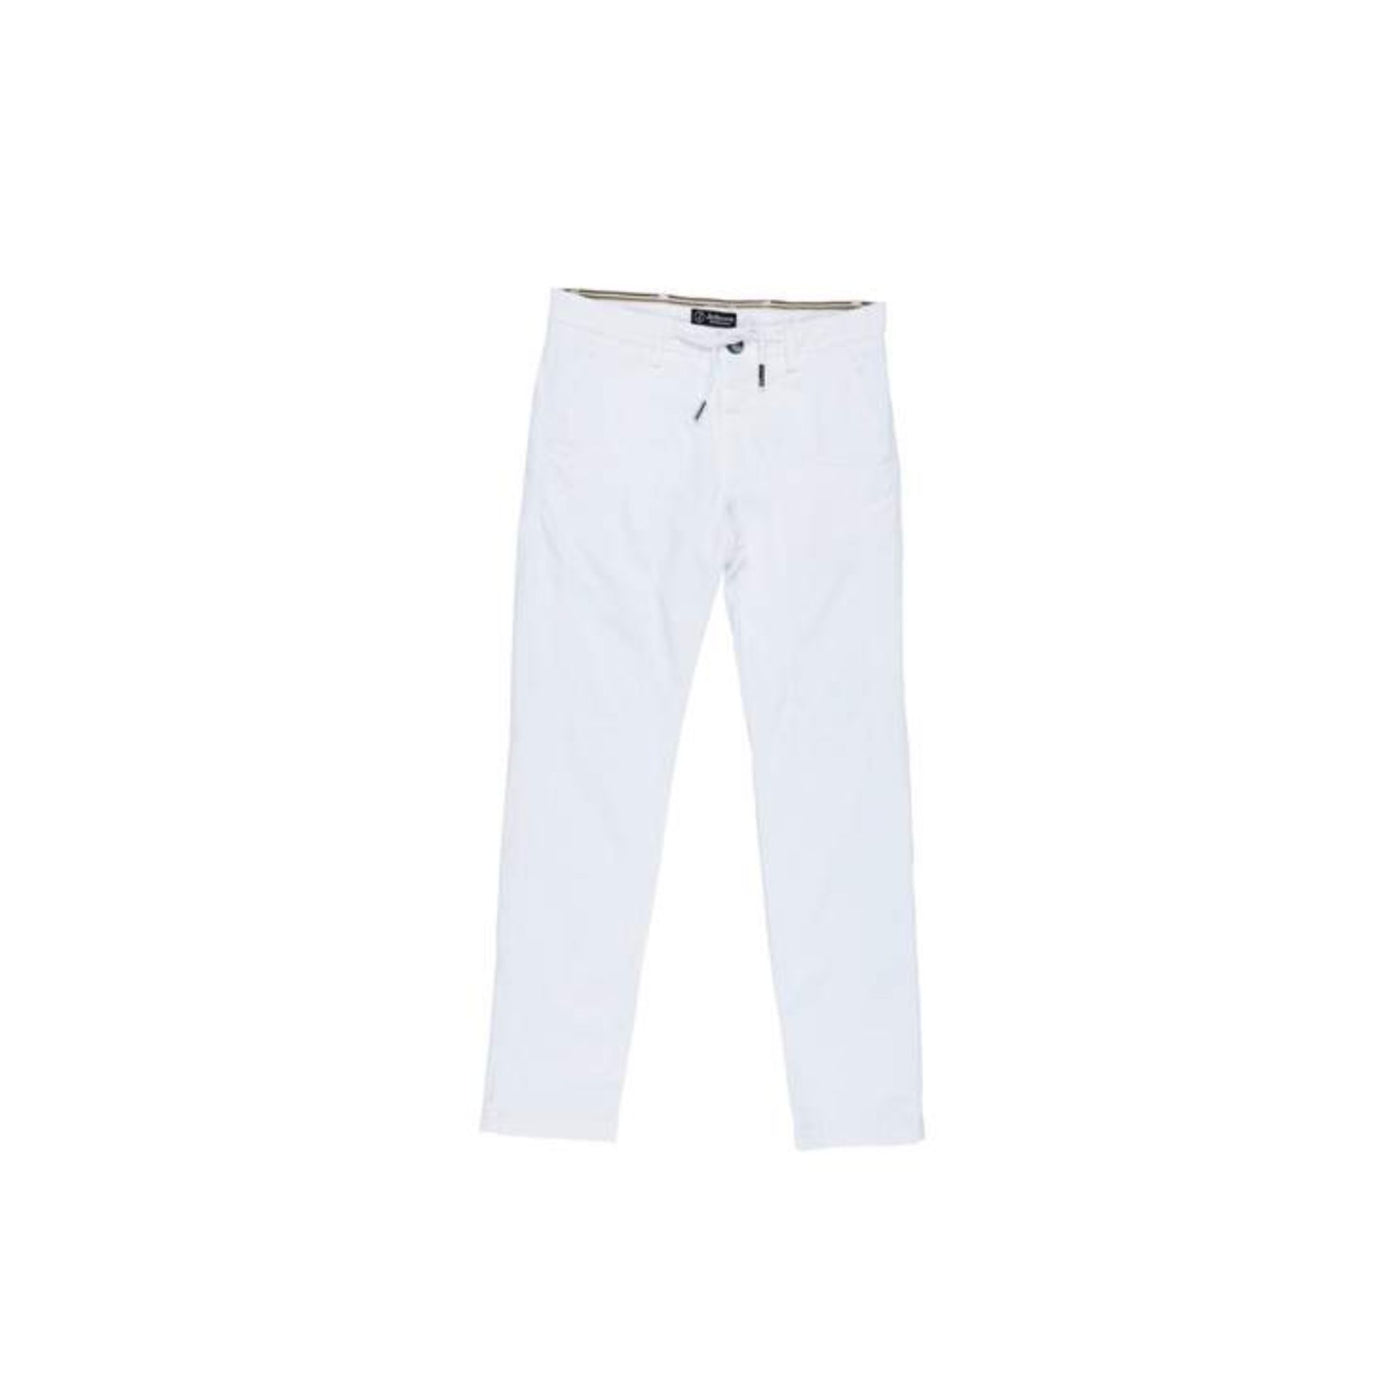 Boy's trousers in solid color with adjustable drawstring